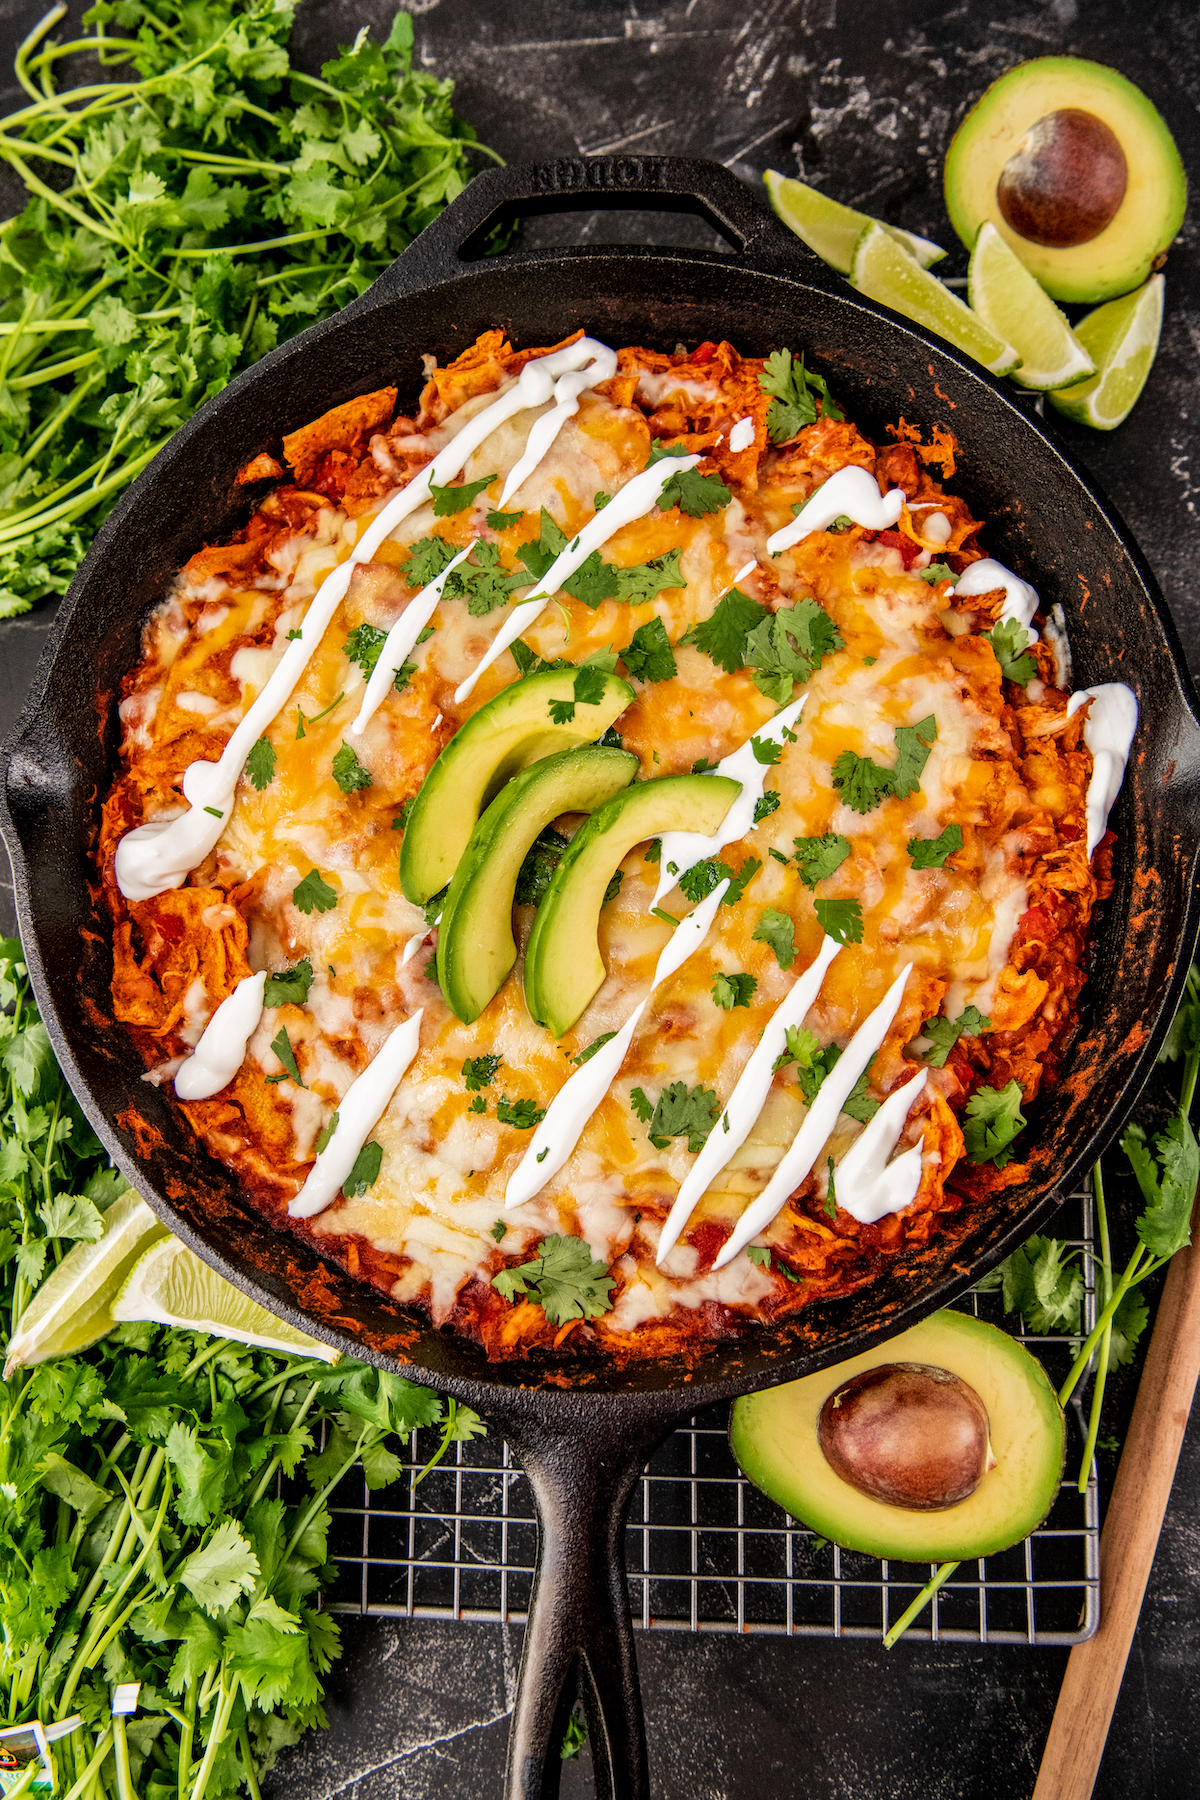 Avocado halves and bunches of cilantro are placed around a skillet full of enchiladas.